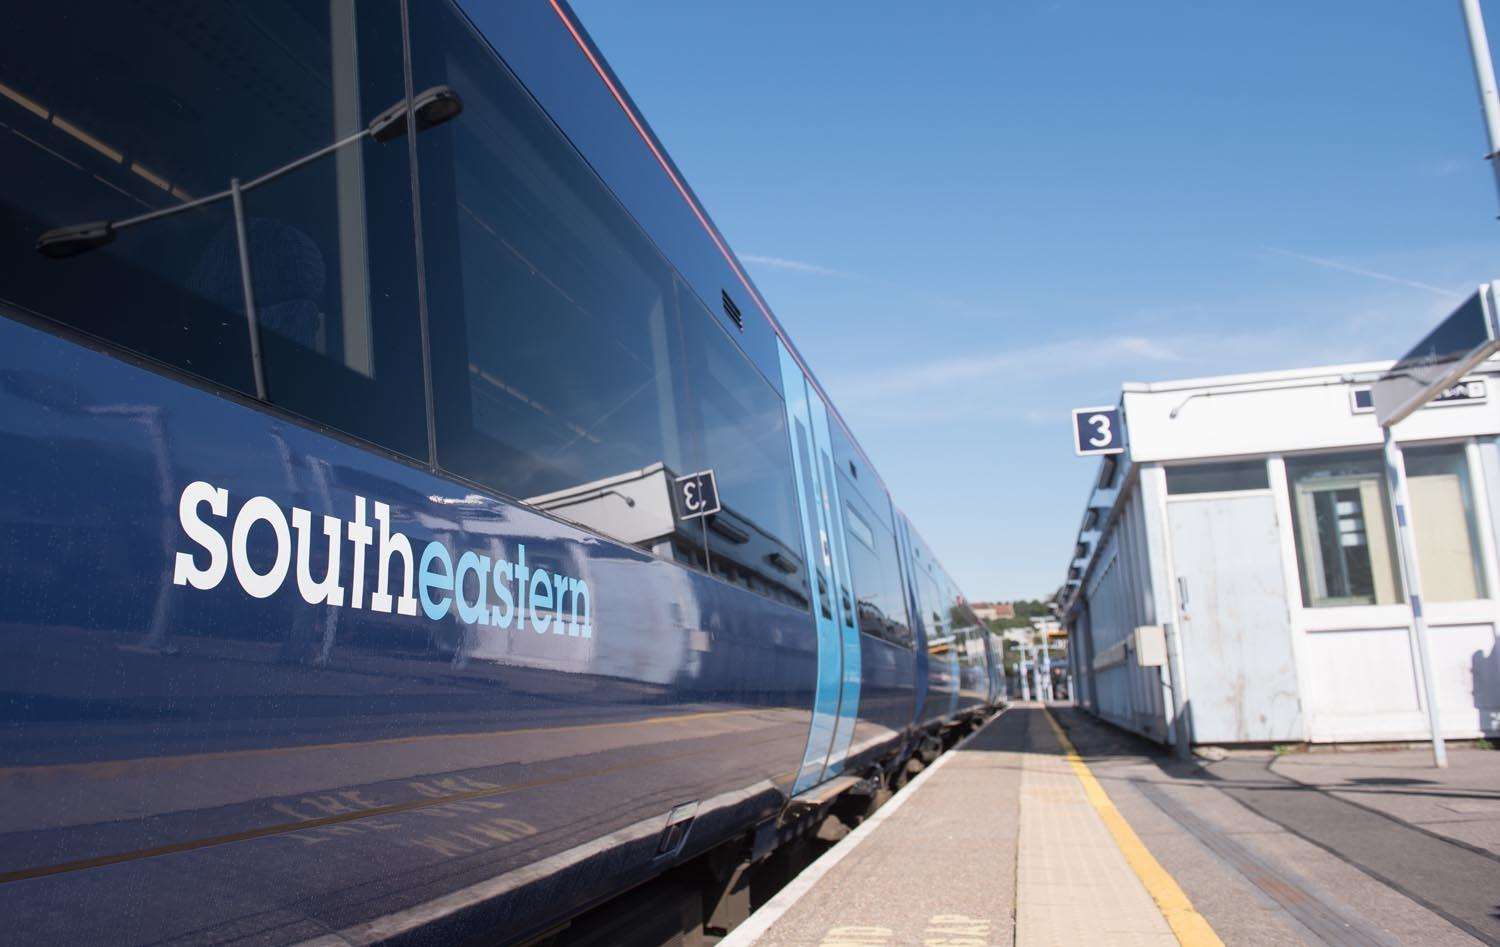 Nine Southeastern stations could be in line for a portion of the government's £300 million funding.